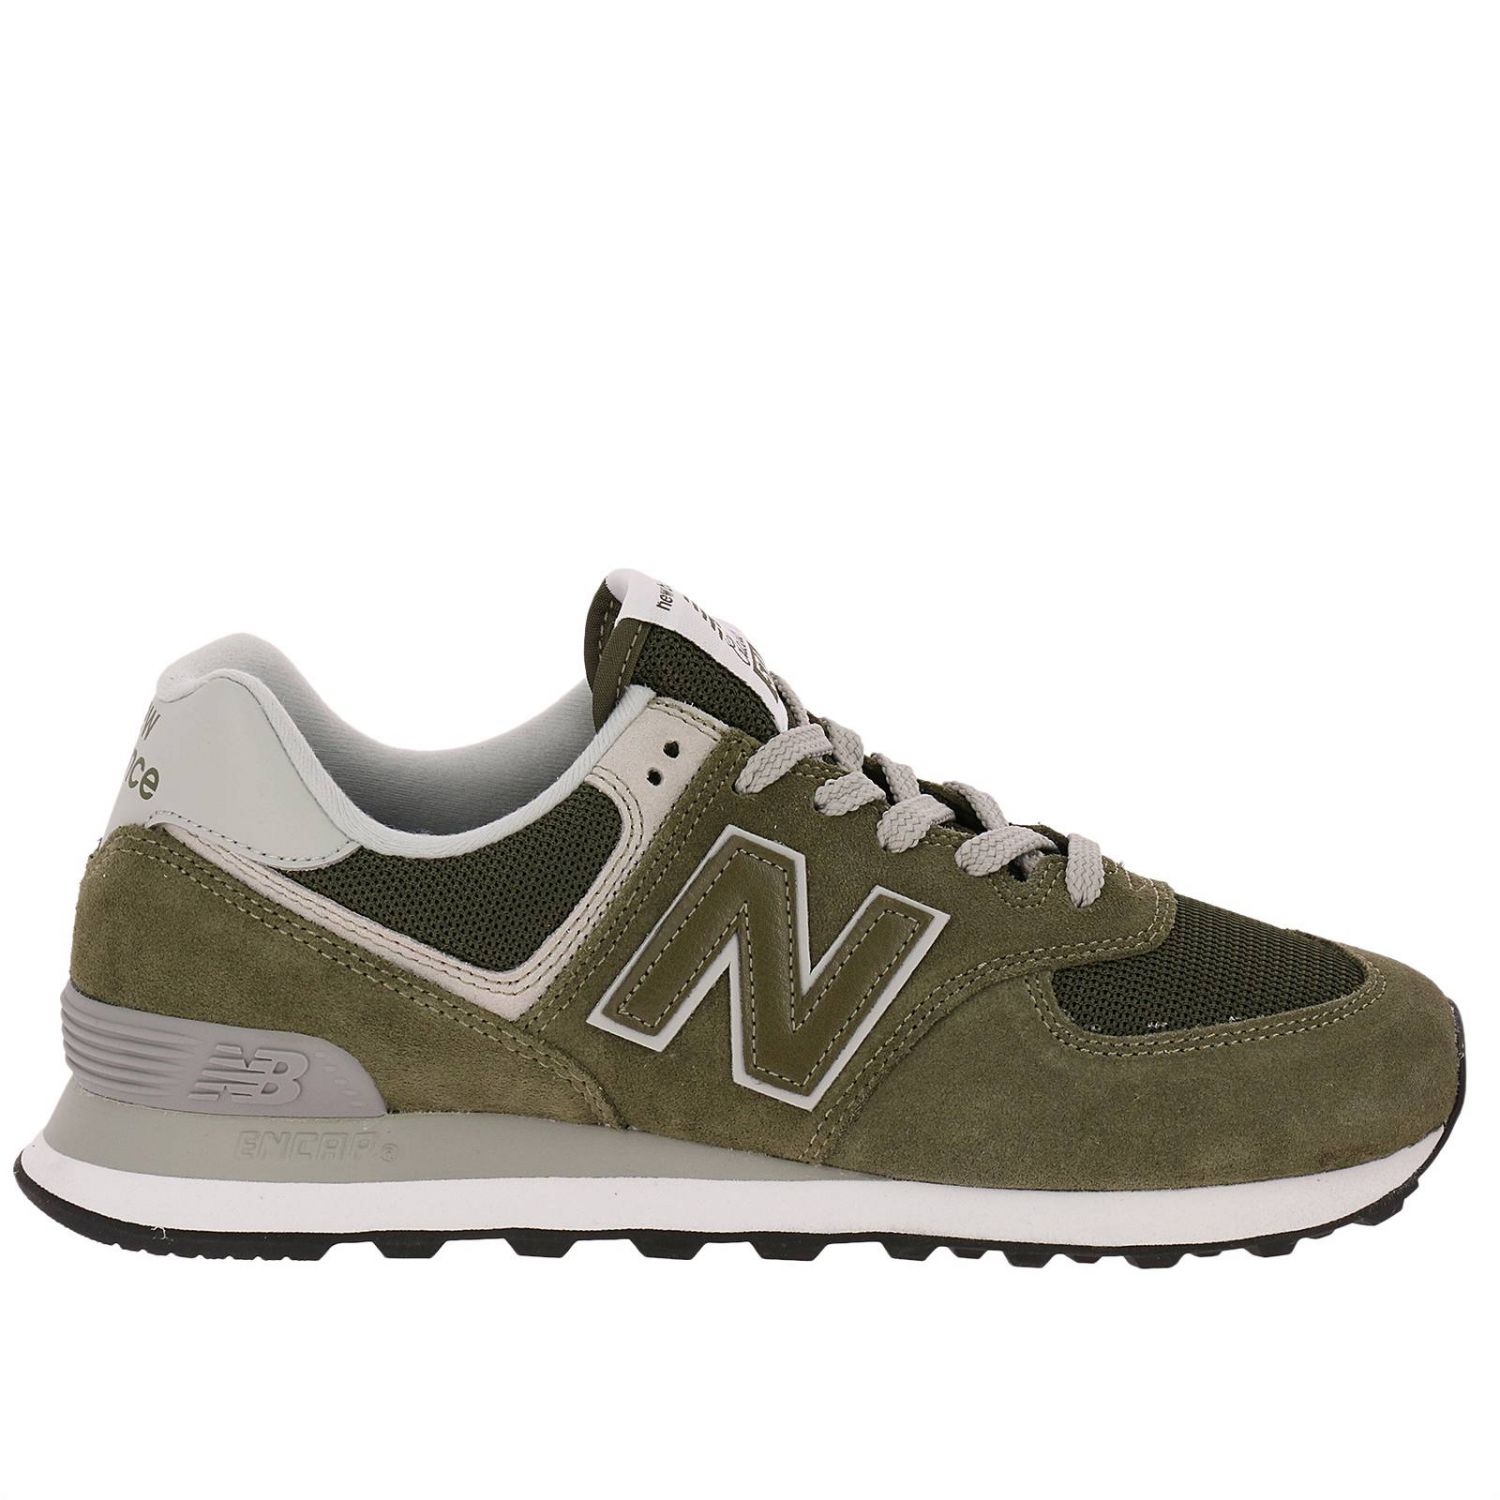 New Balance Outlet: Shoes men | Sneakers New Balance Men Military ...